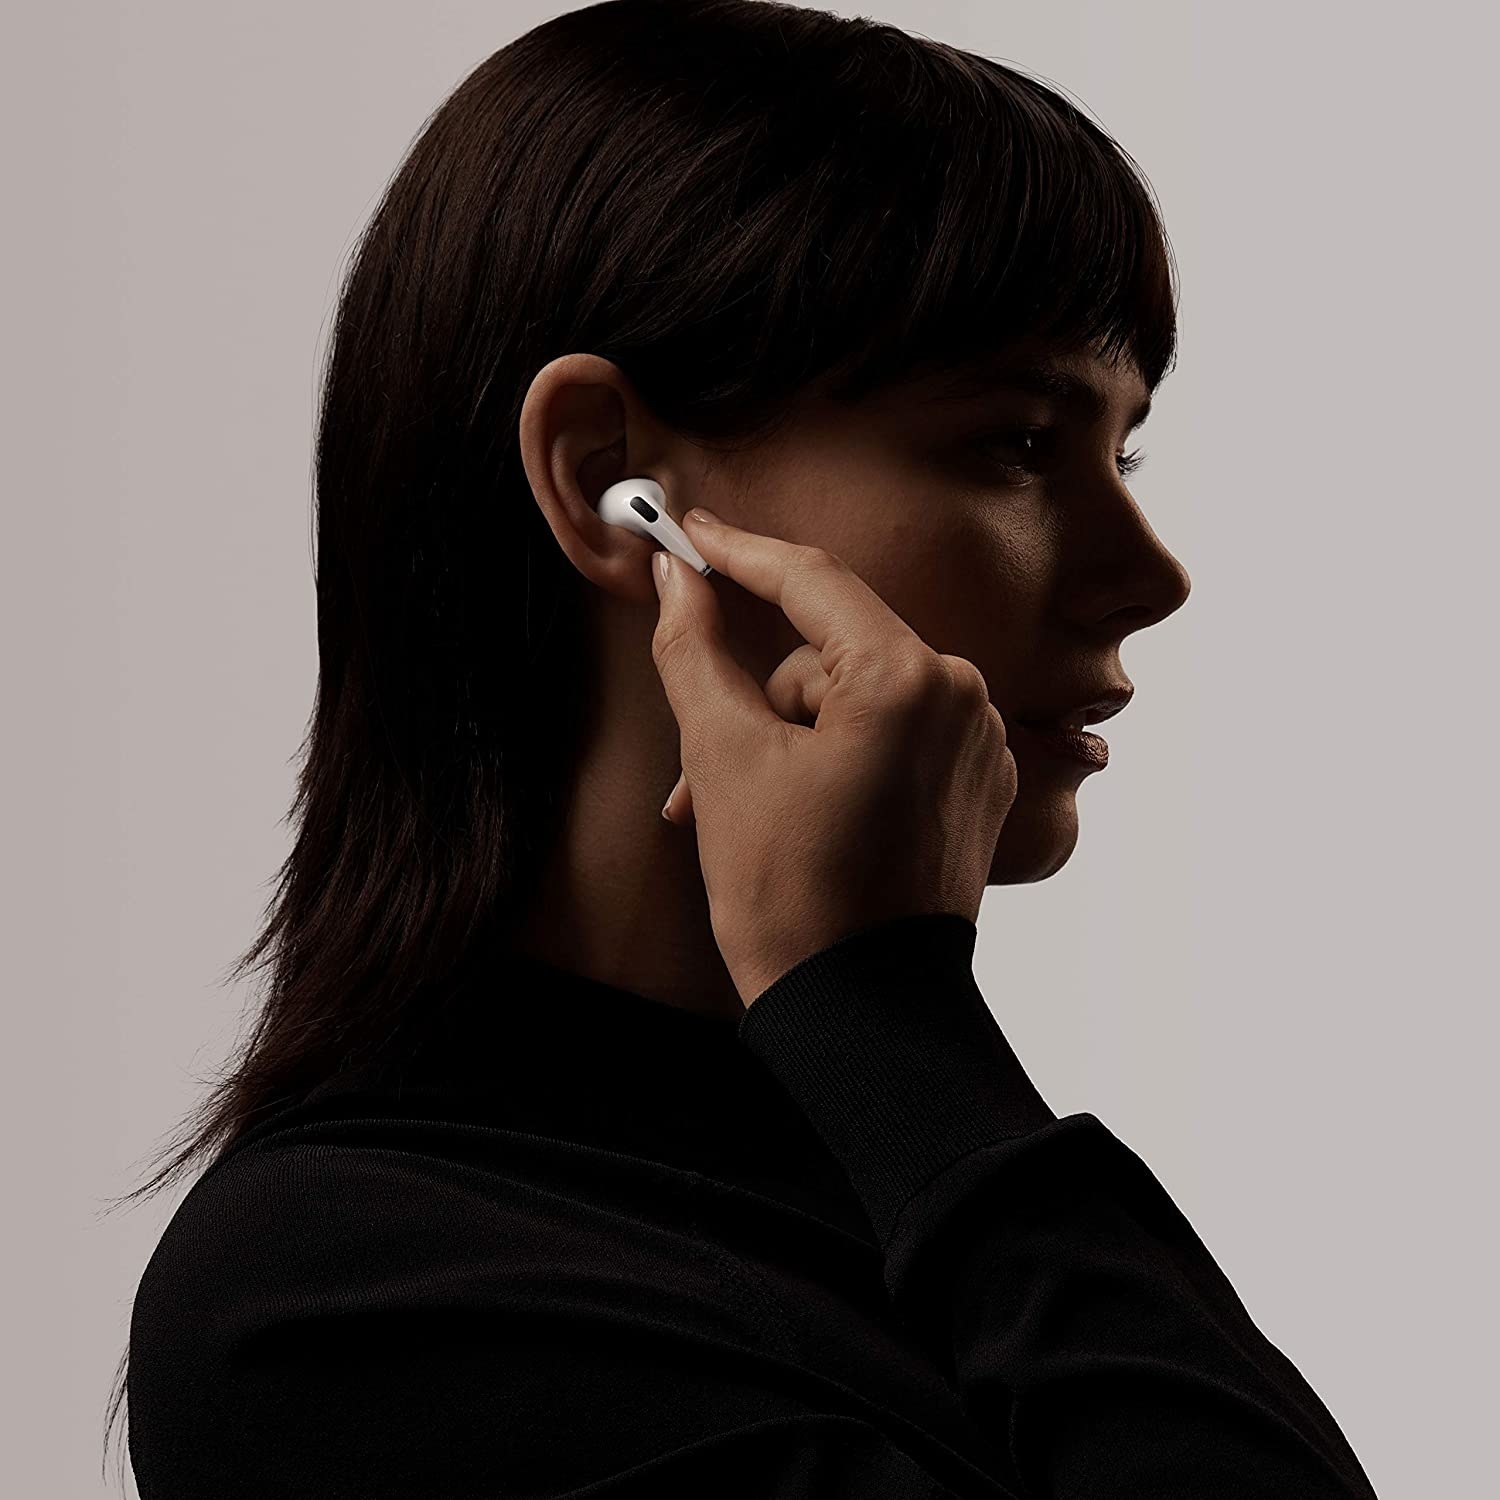 A woman putting the earbud in her ear